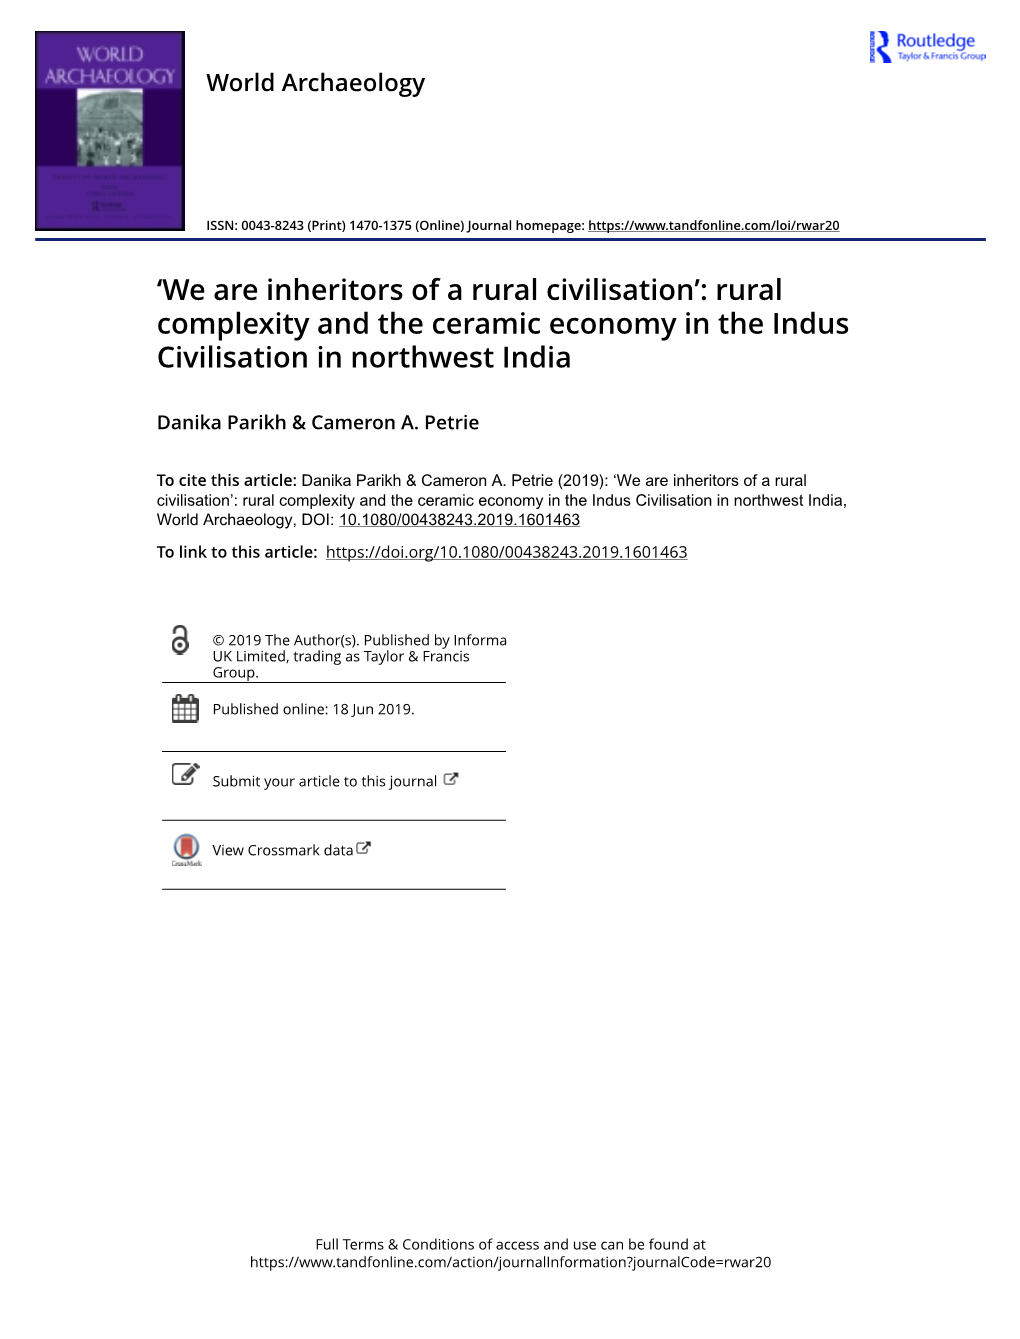 Rural Complexity and the Ceramic Economy in the Indus Civilisation in Northwest India